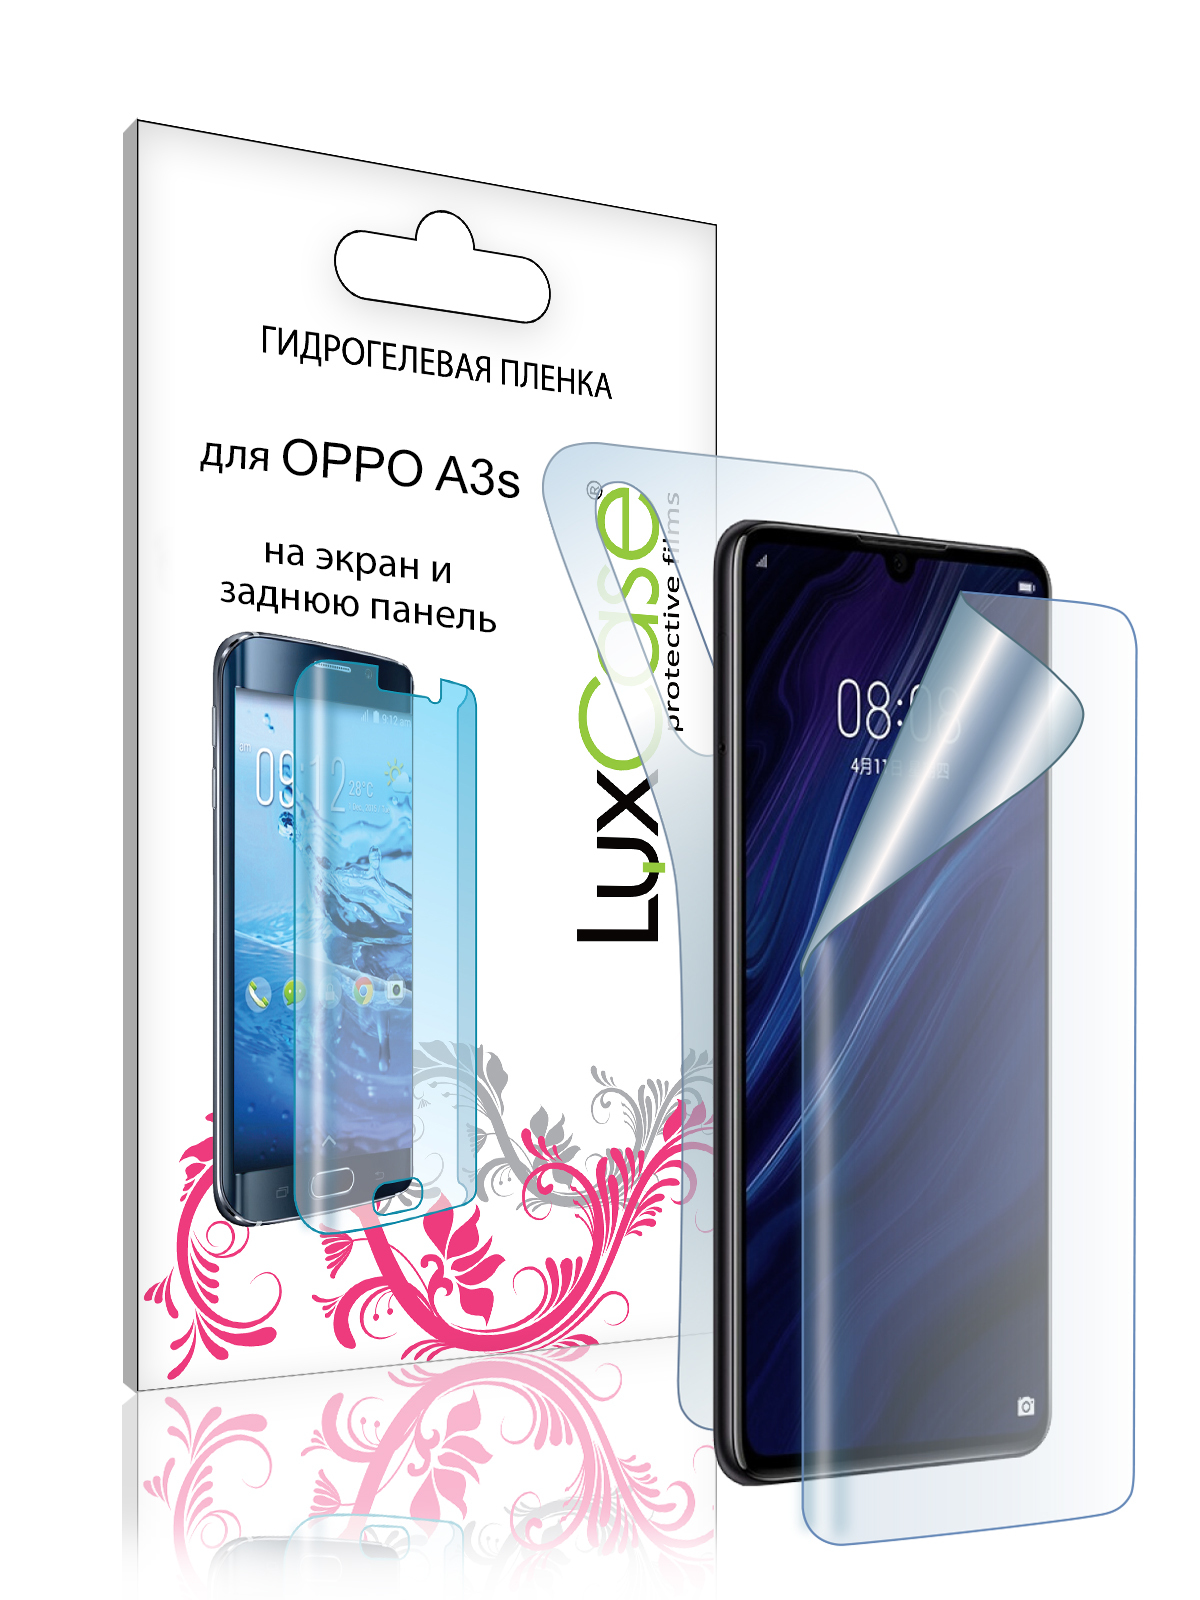 Гидрогелевая пленка LuxCase для Oppo A3s 0.14mm Front and Back Transparent 86976 гидрогелевая пленка luxcase для oppo a3s 0 14mm front and back transparent 86976